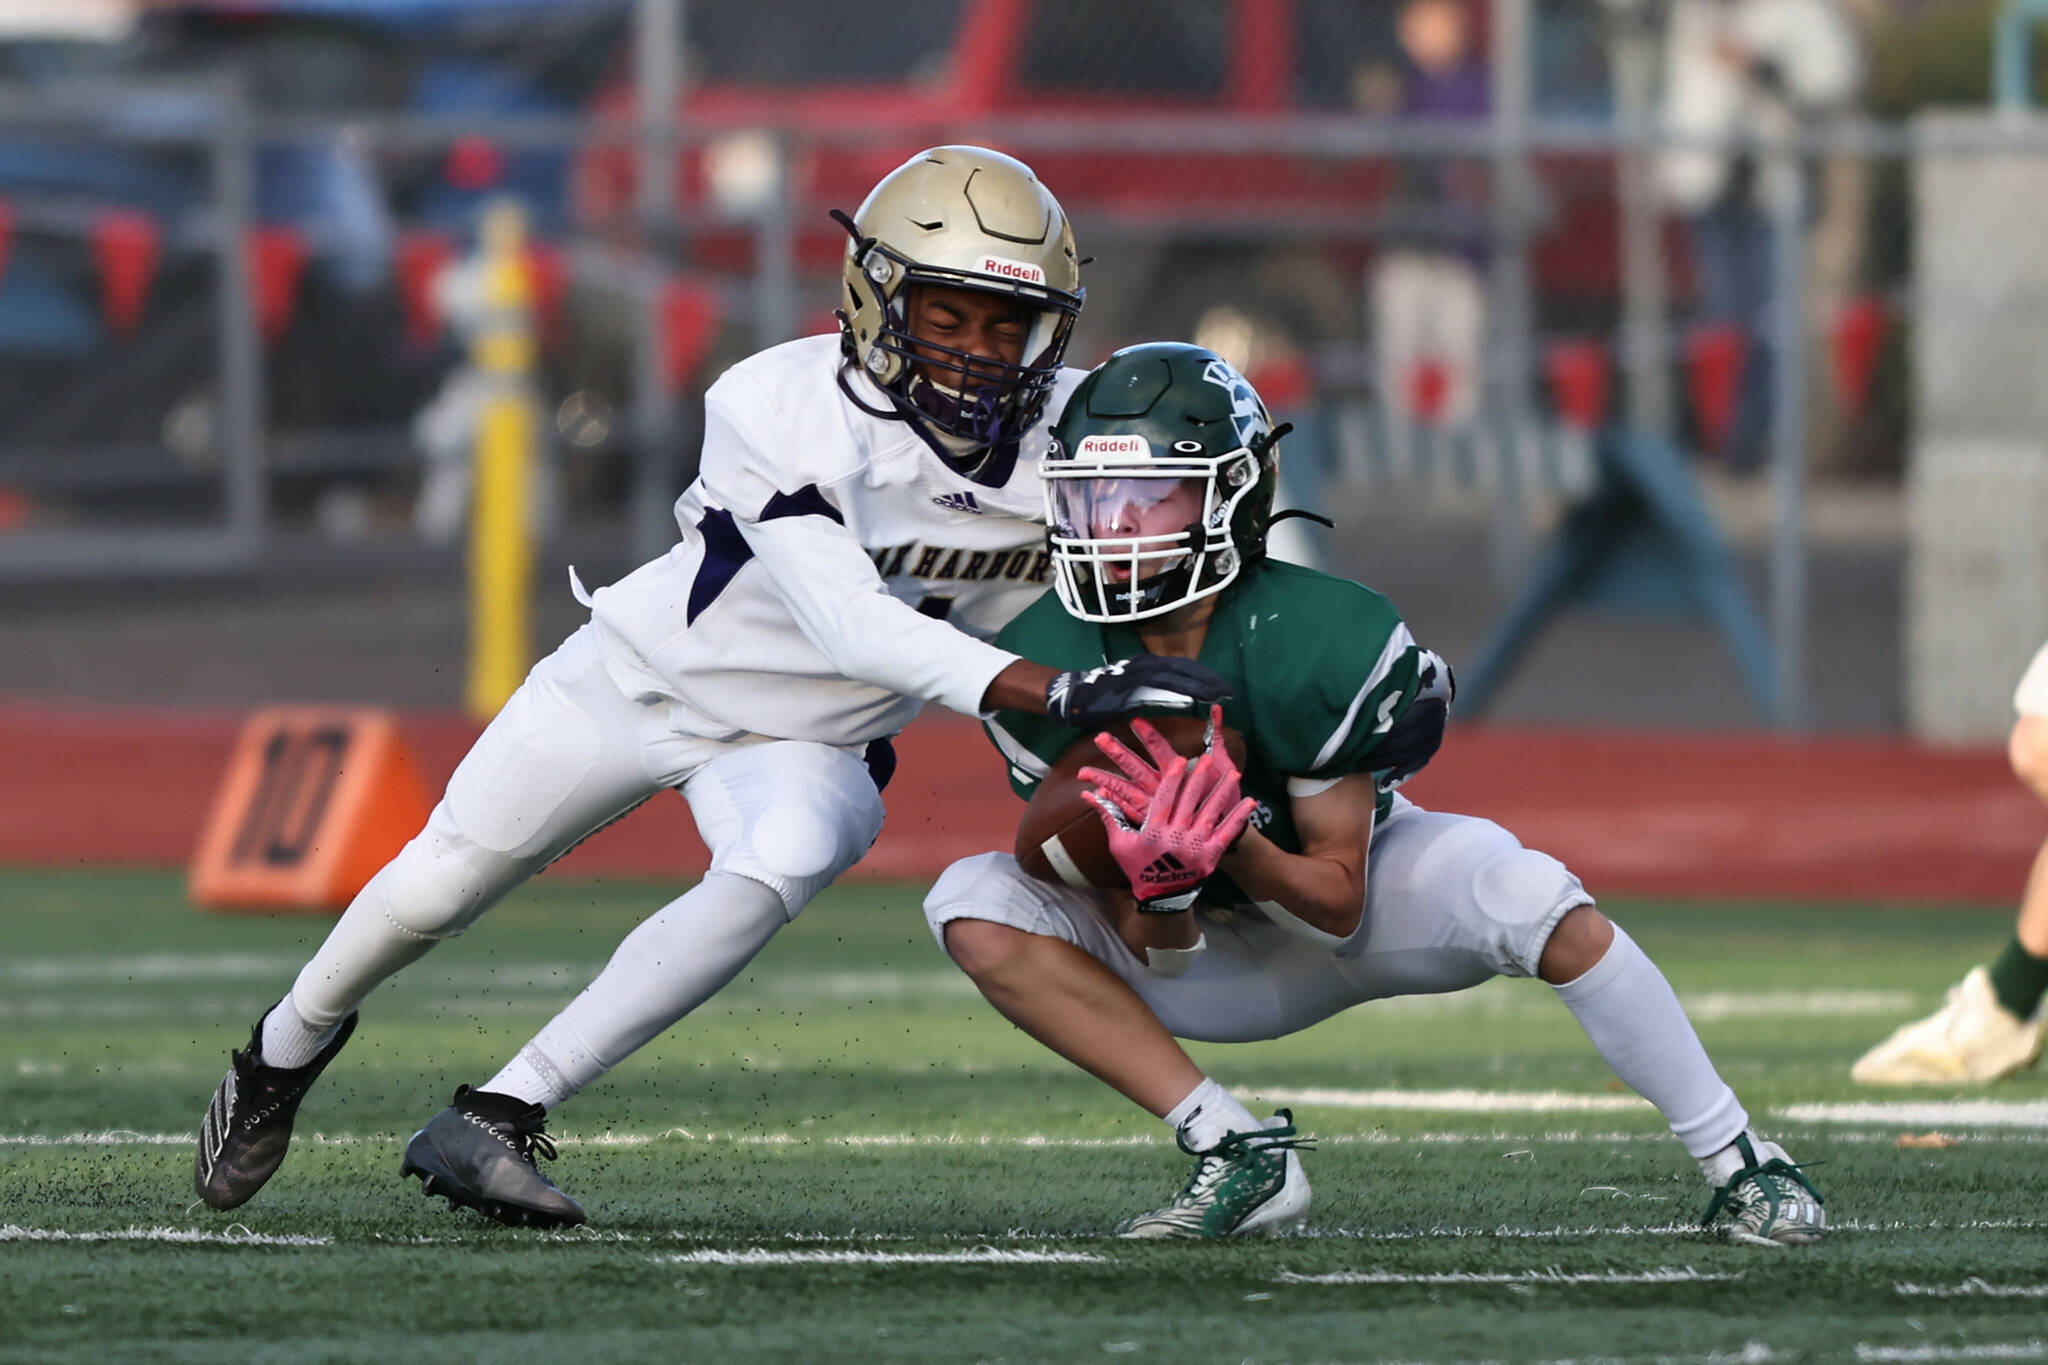 Taiis Hardin tackles an opponent during the playoff game at Edmonds Oct. 28. (Photo by John Fisken)